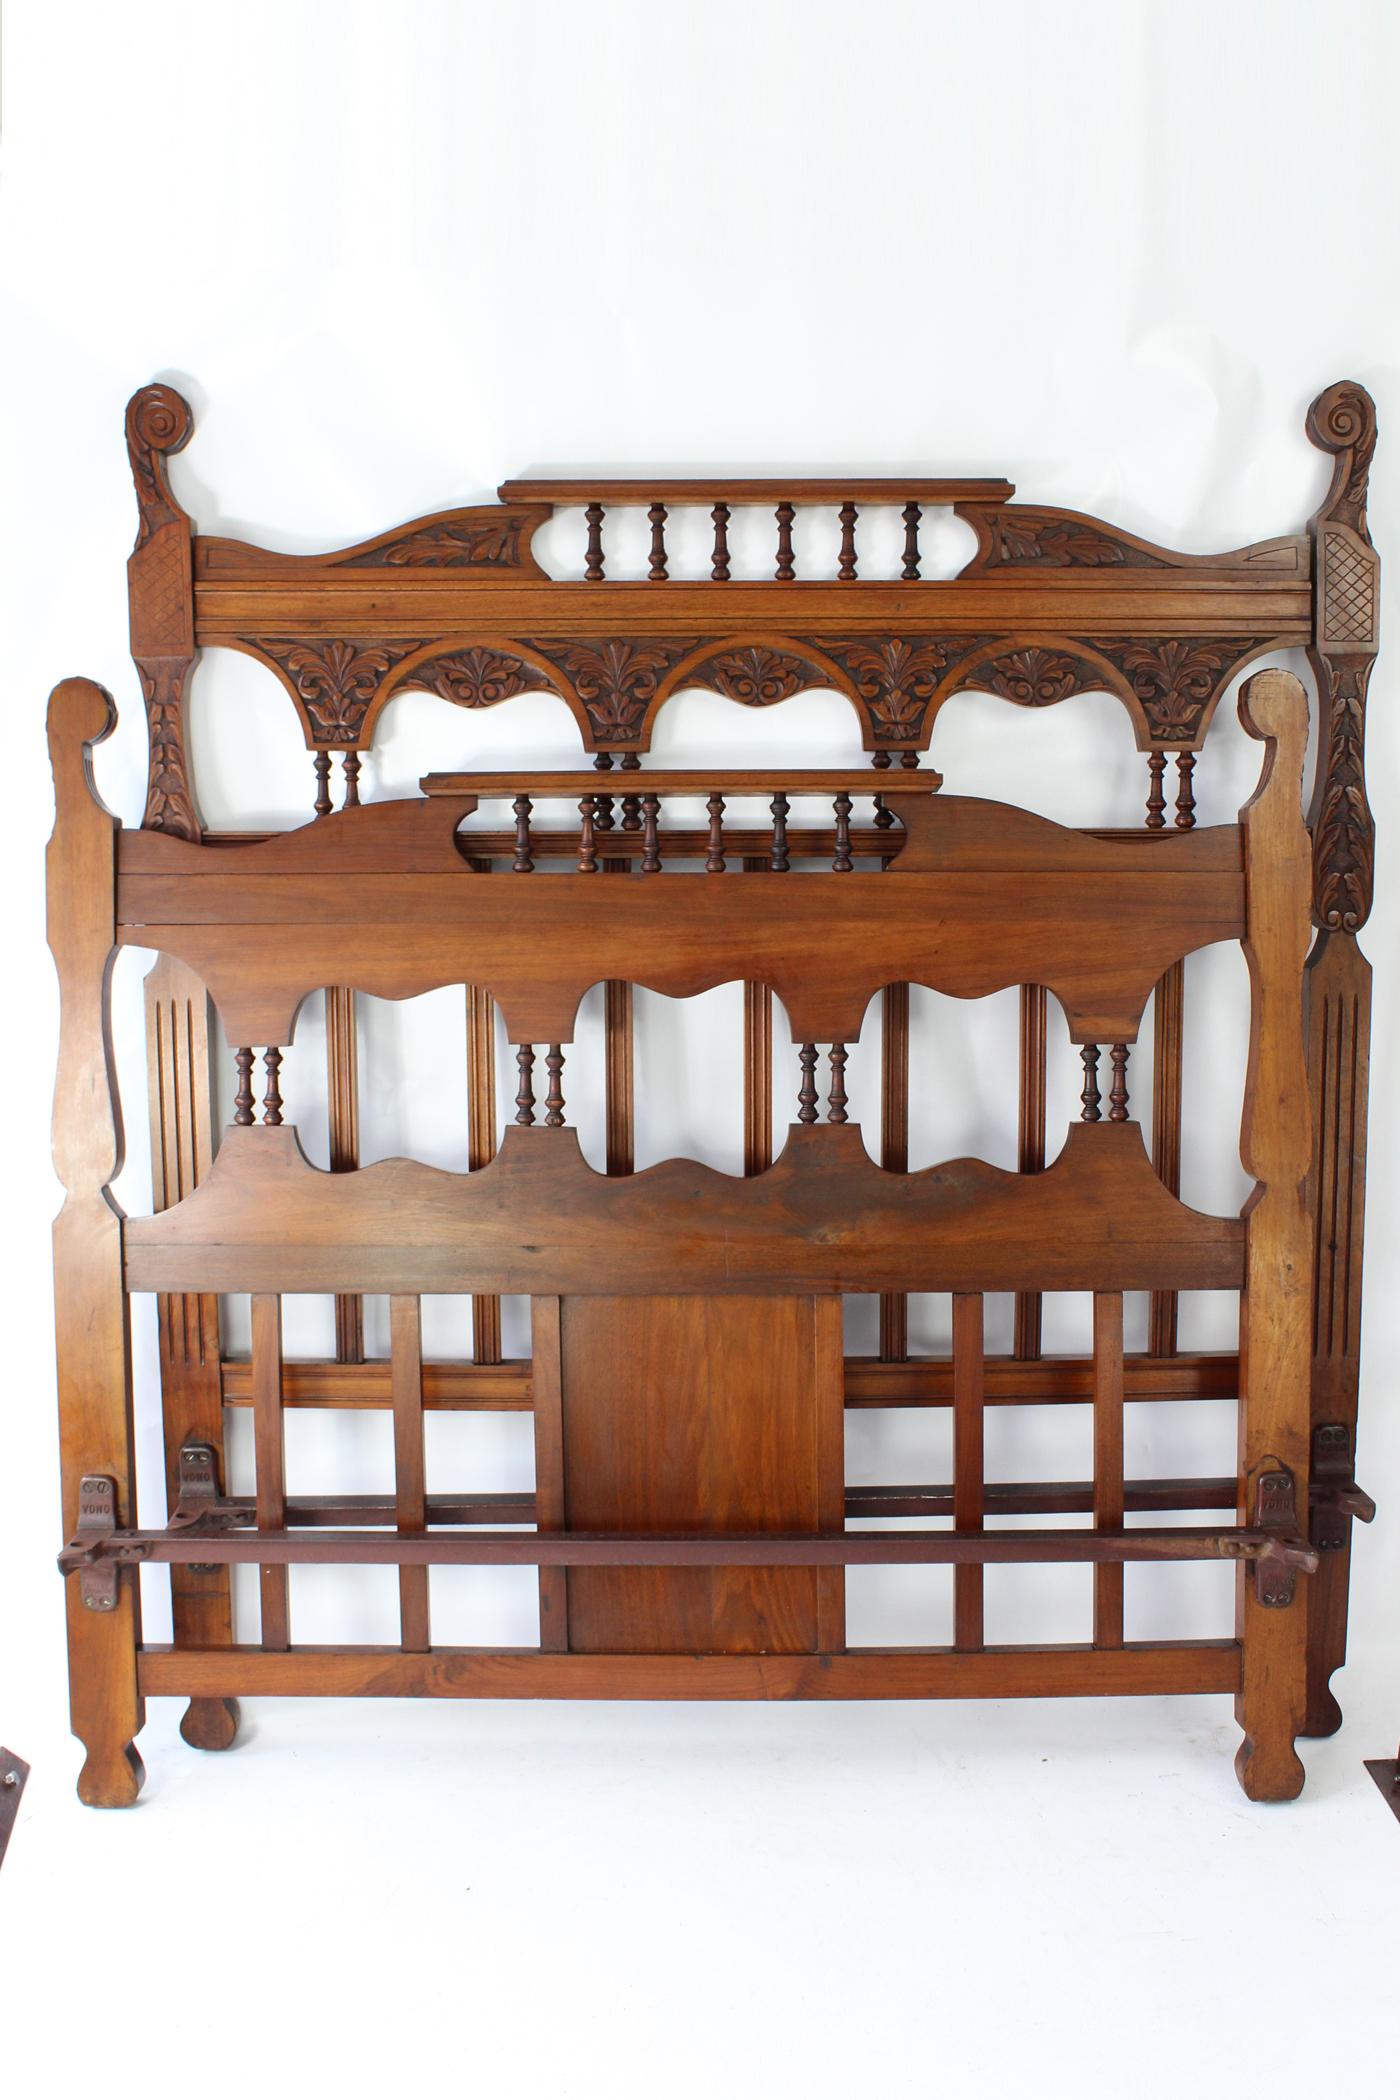 A truly magnificent antique Victorian carved walnut double bed dating from circa 1895. In a richly figured walnut, with attractive foliate carving throughout. Featuring carved top rails with turned twin pilaster supports and vertical slats, the